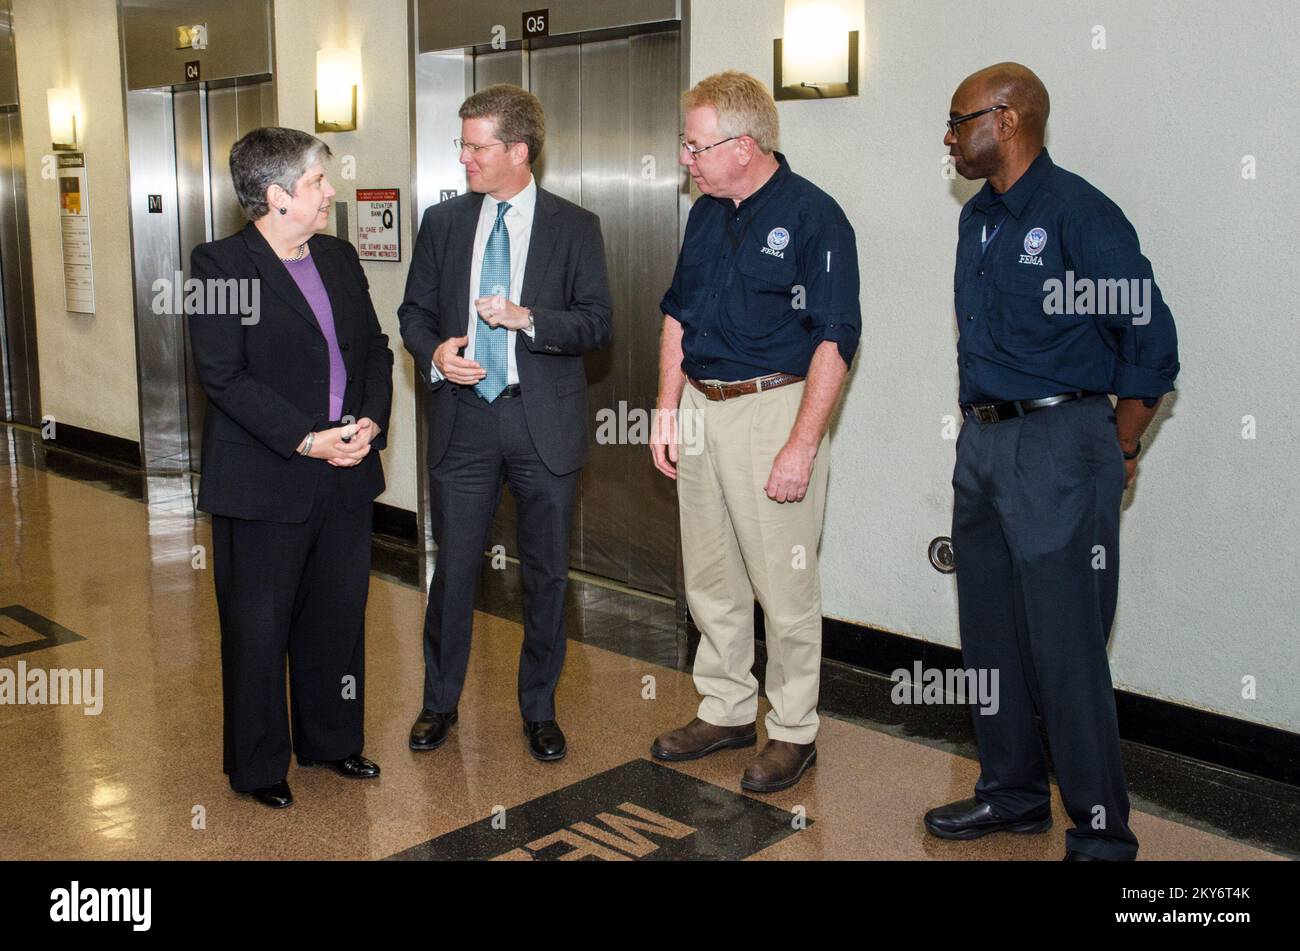 New York, N.Y., June 14, 2013  Department of Homeland Security Secretary, Janet Napolitano, Secretary of Housing and Urban Development (HUD) Shaun Donovan, FEMA Federal Coordinating Officer (FCO) Michael Byrne and Deputy FCO Willie Nunn met with Health and Hospitals Corporation (HHC) executives at Bellevue Hospital to discuss repair work taking place in a number of New York City Hospitals damaged during Hurricane Sandy. K.C.Wilsey/FEMA. New York Hurricane Sandy. Photographs Relating to Disasters and Emergency Management Programs, Activities, and Officials Stock Photo